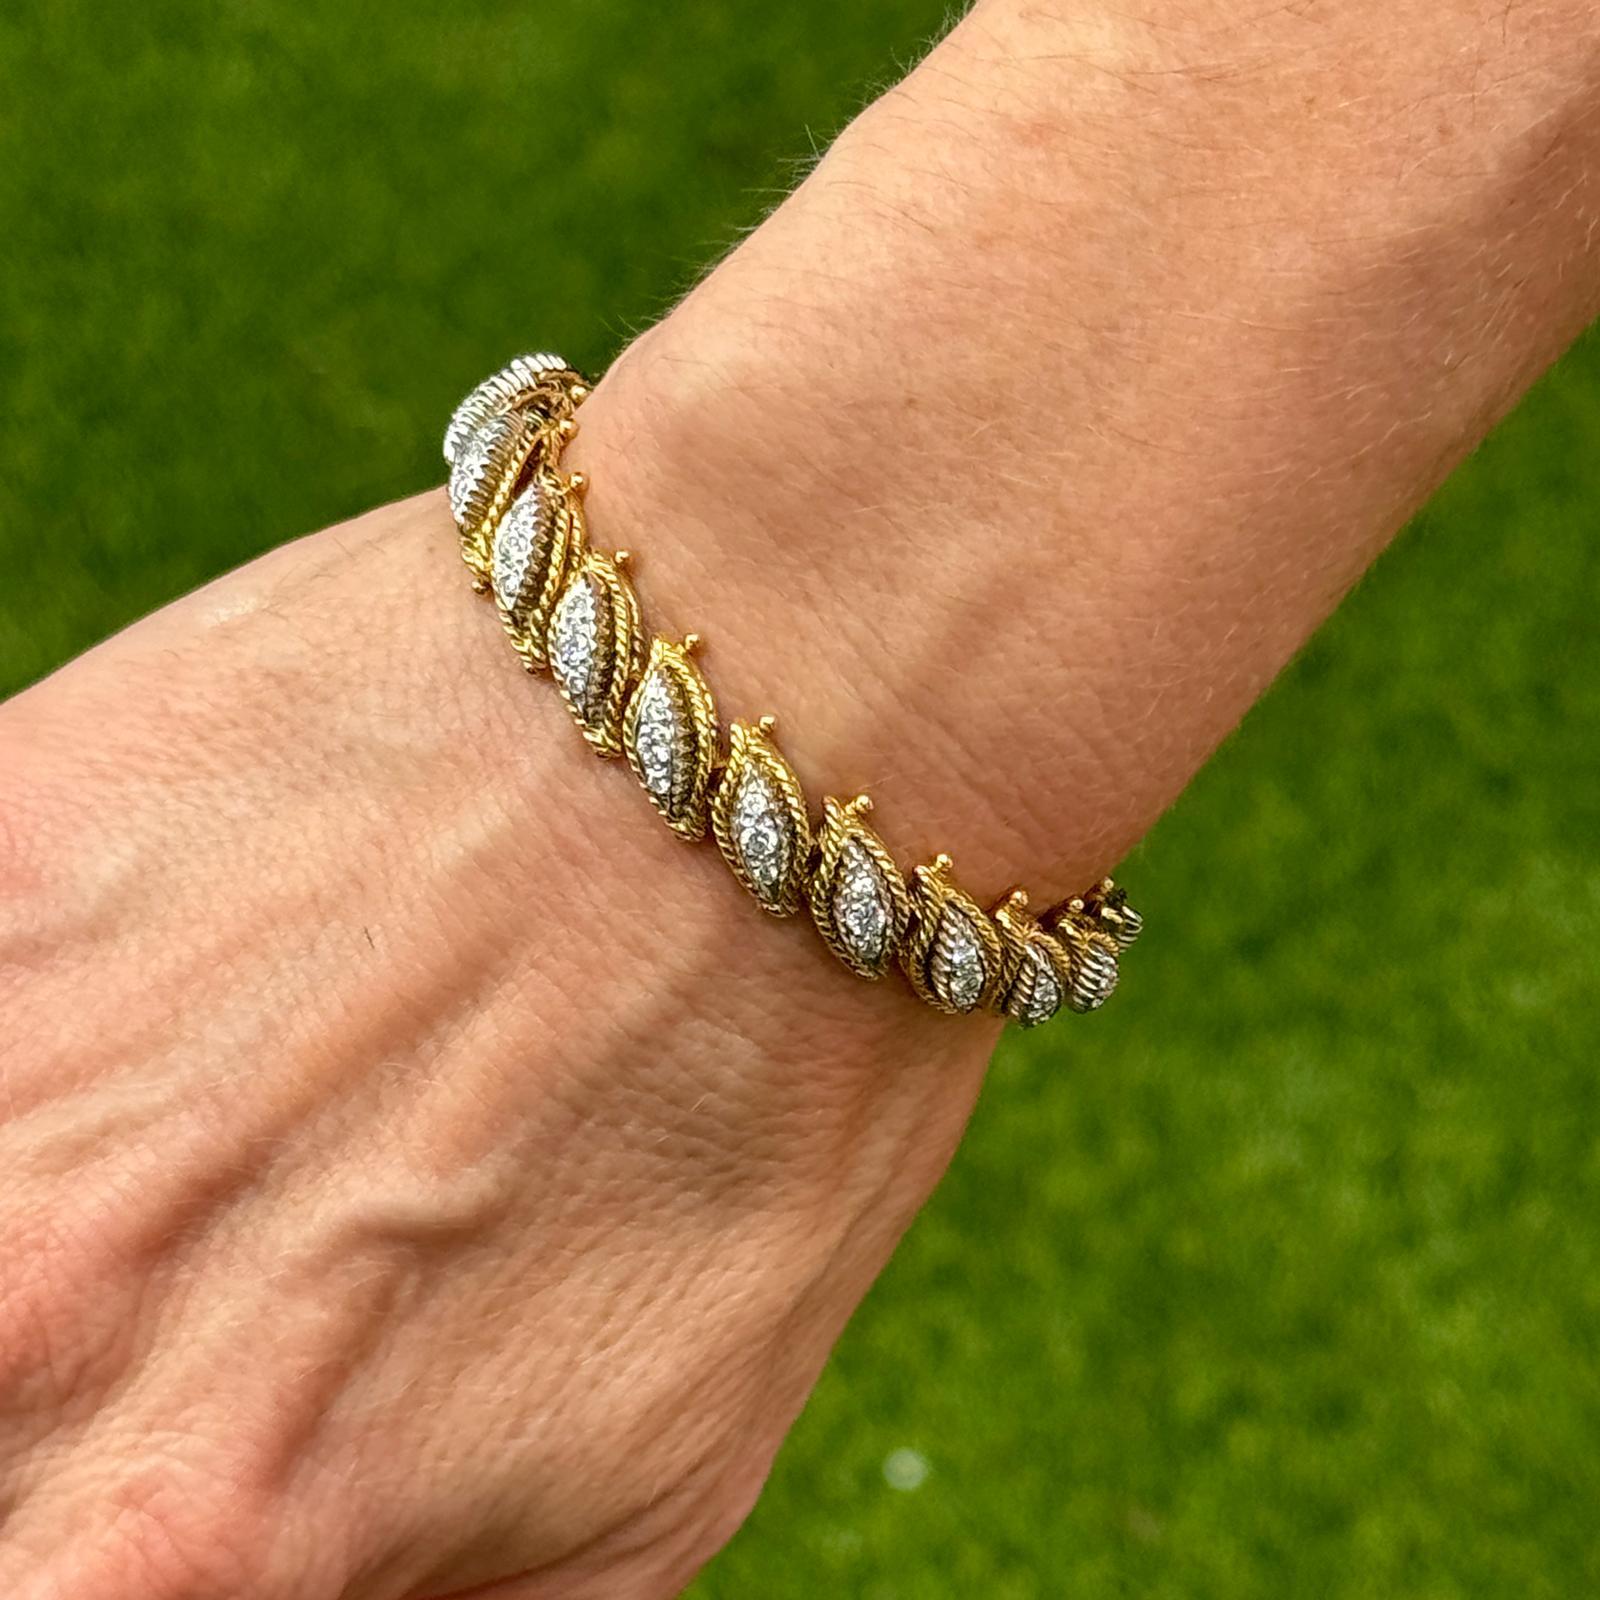 Beautiful diamond link vintage bracelet handcrafted in 18 karat yellow and white gold. The bracelet features 57 round briliant cut diamonds weighing approximately 1.71 carat total weight. The diamonds are graded G-H color and VS2-SI1 clarity. The